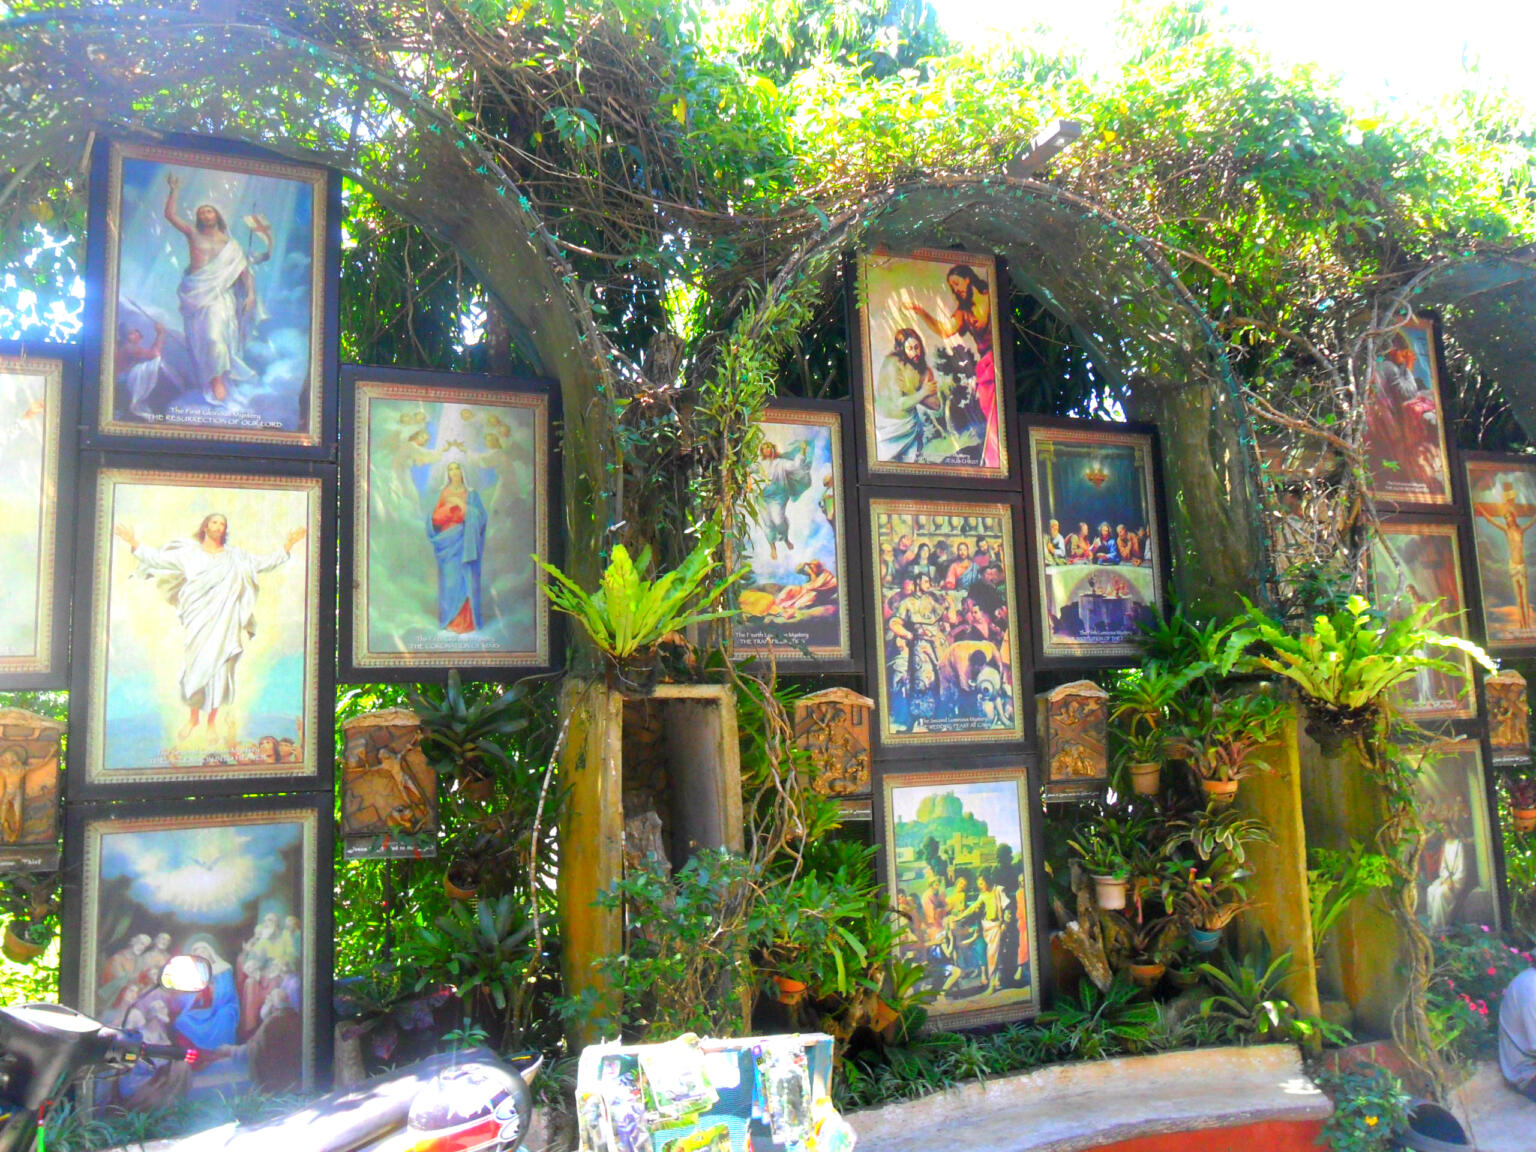 Tierra de Maria and Our Lady of Manaoag